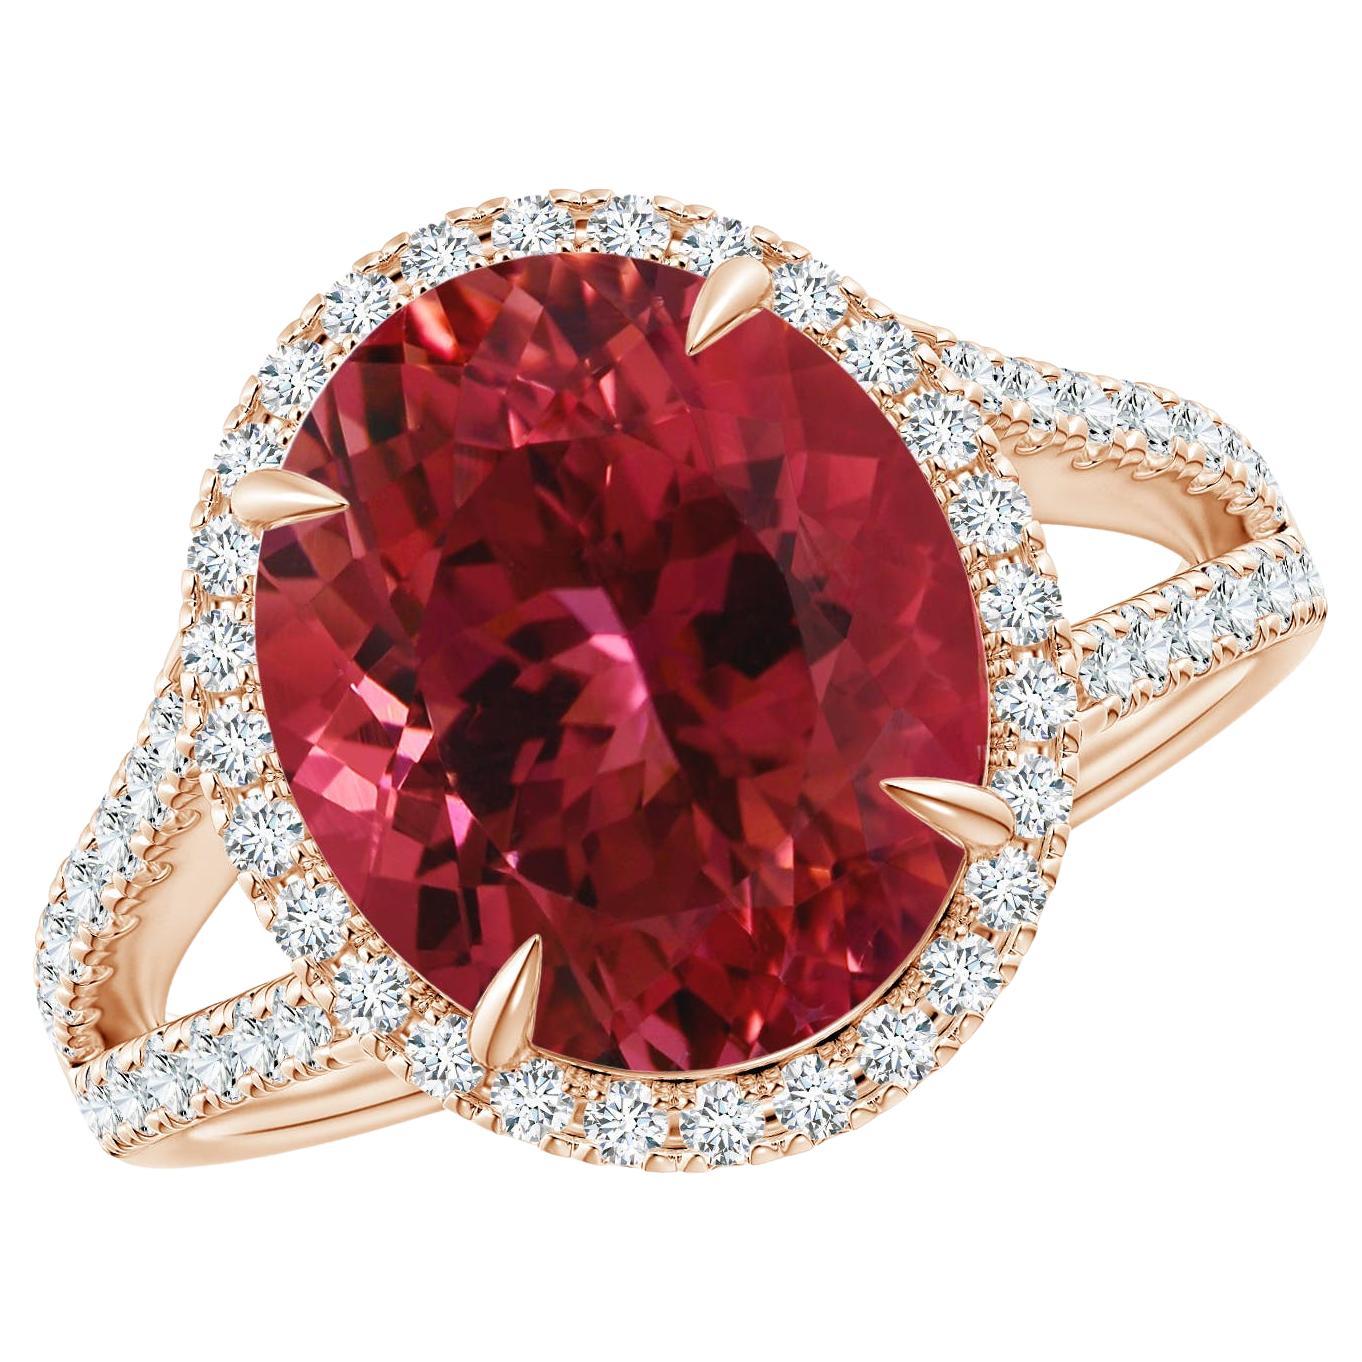 For Sale:  Angara Gia Certified Natural Pink Tourmaline Rose Gold Ring with Halo